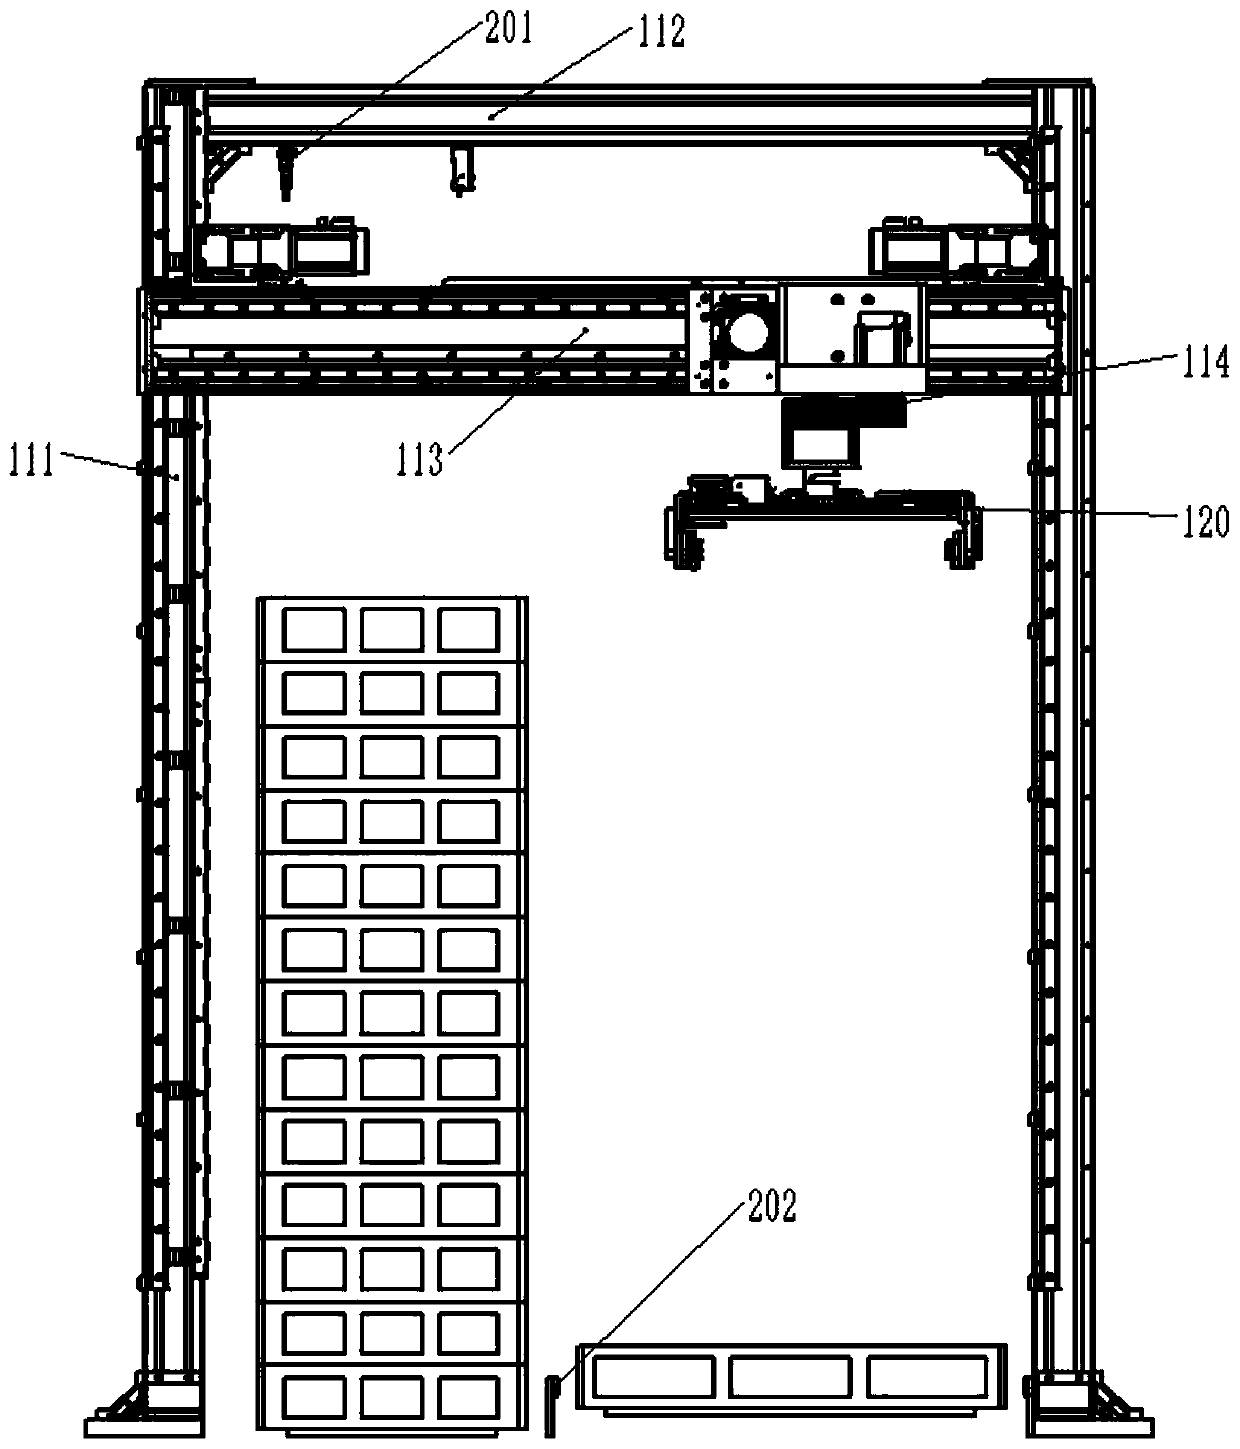 A stacking and unstacking device for automatic transfer of box structures